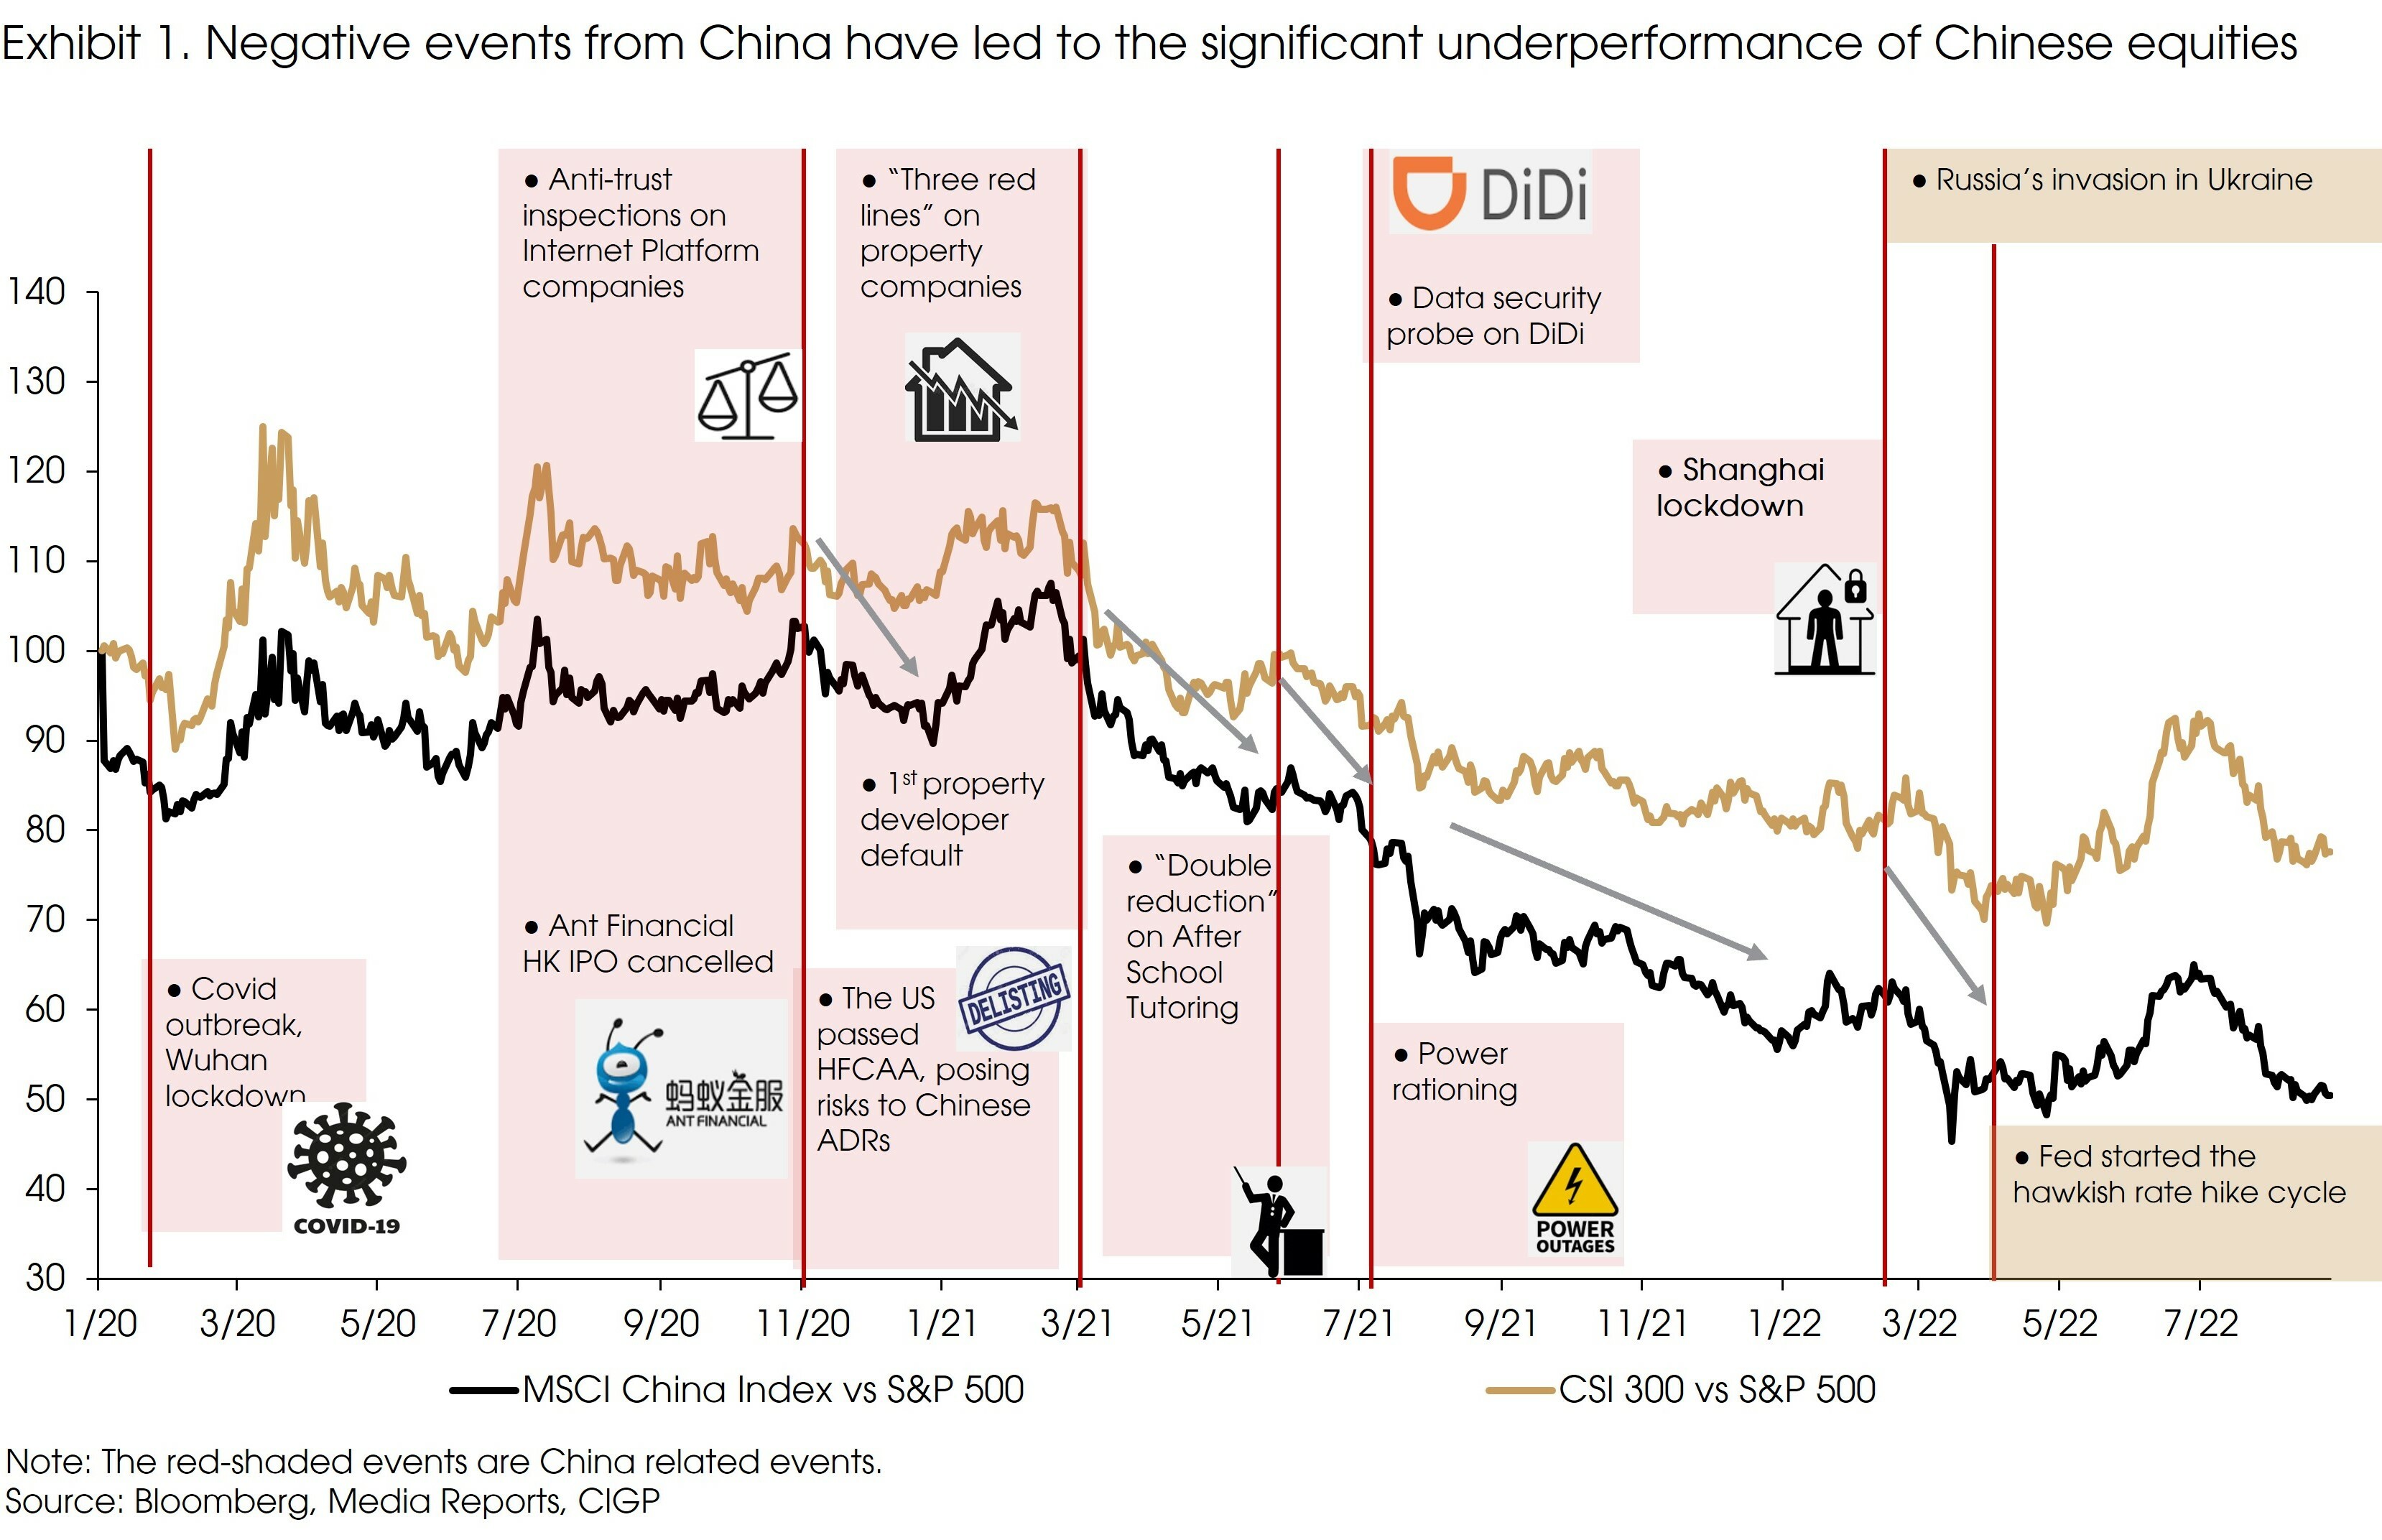 Exhibit 1 Negative Events From China Have Led to the Significant Underperformance of Chinese Equities